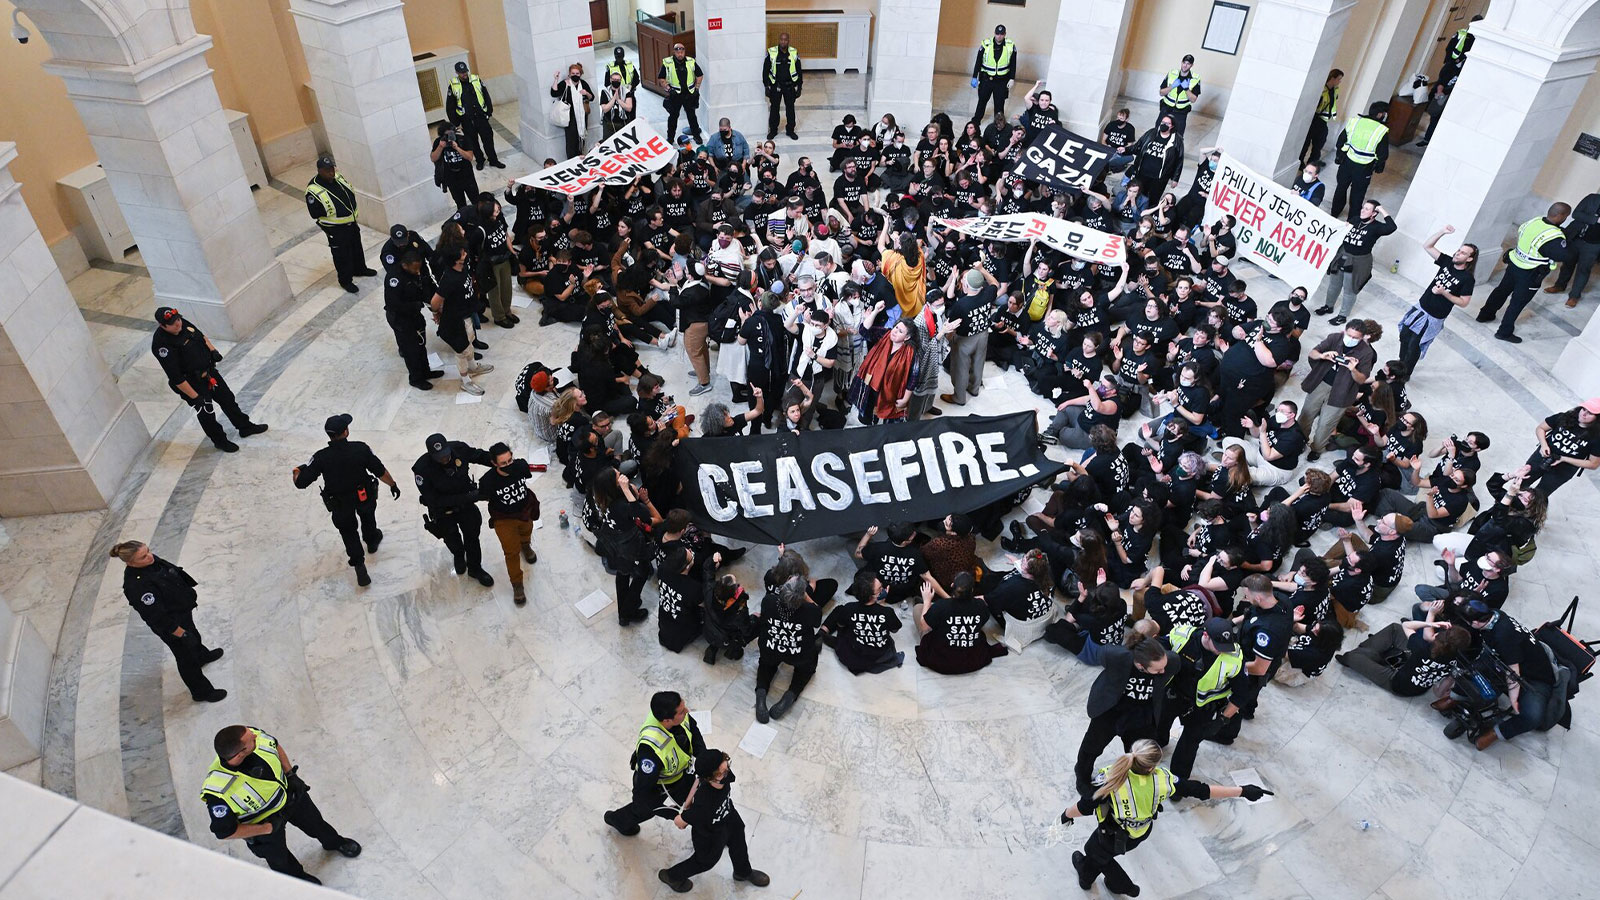 Pro-Palestinian demonstrators in the rotunda of the Cannon House Office Building in Washington in mid-October